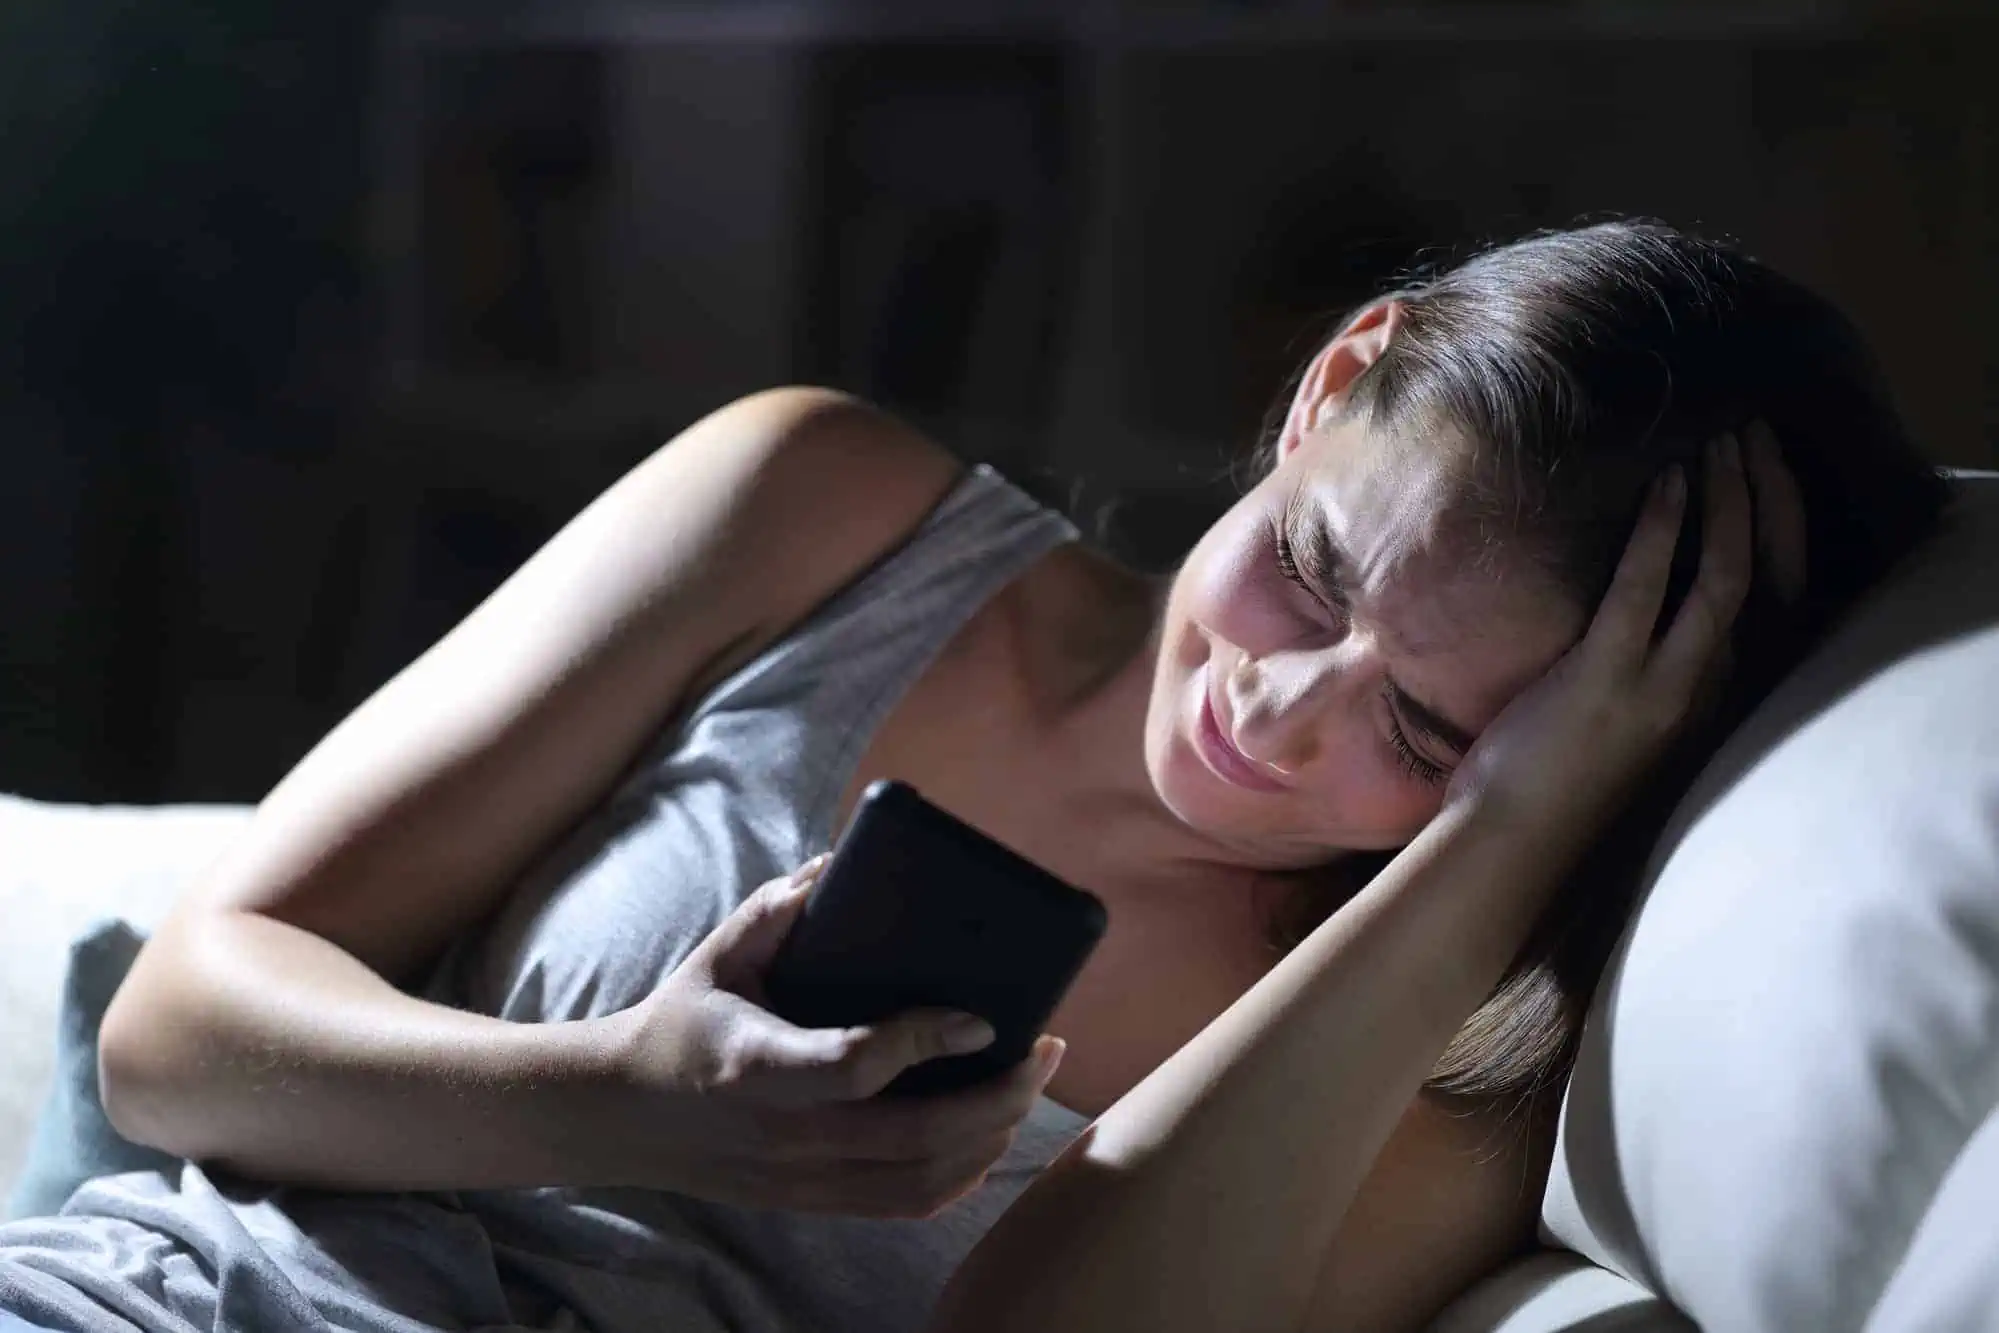 A woman laying on a couch holding a cell phone